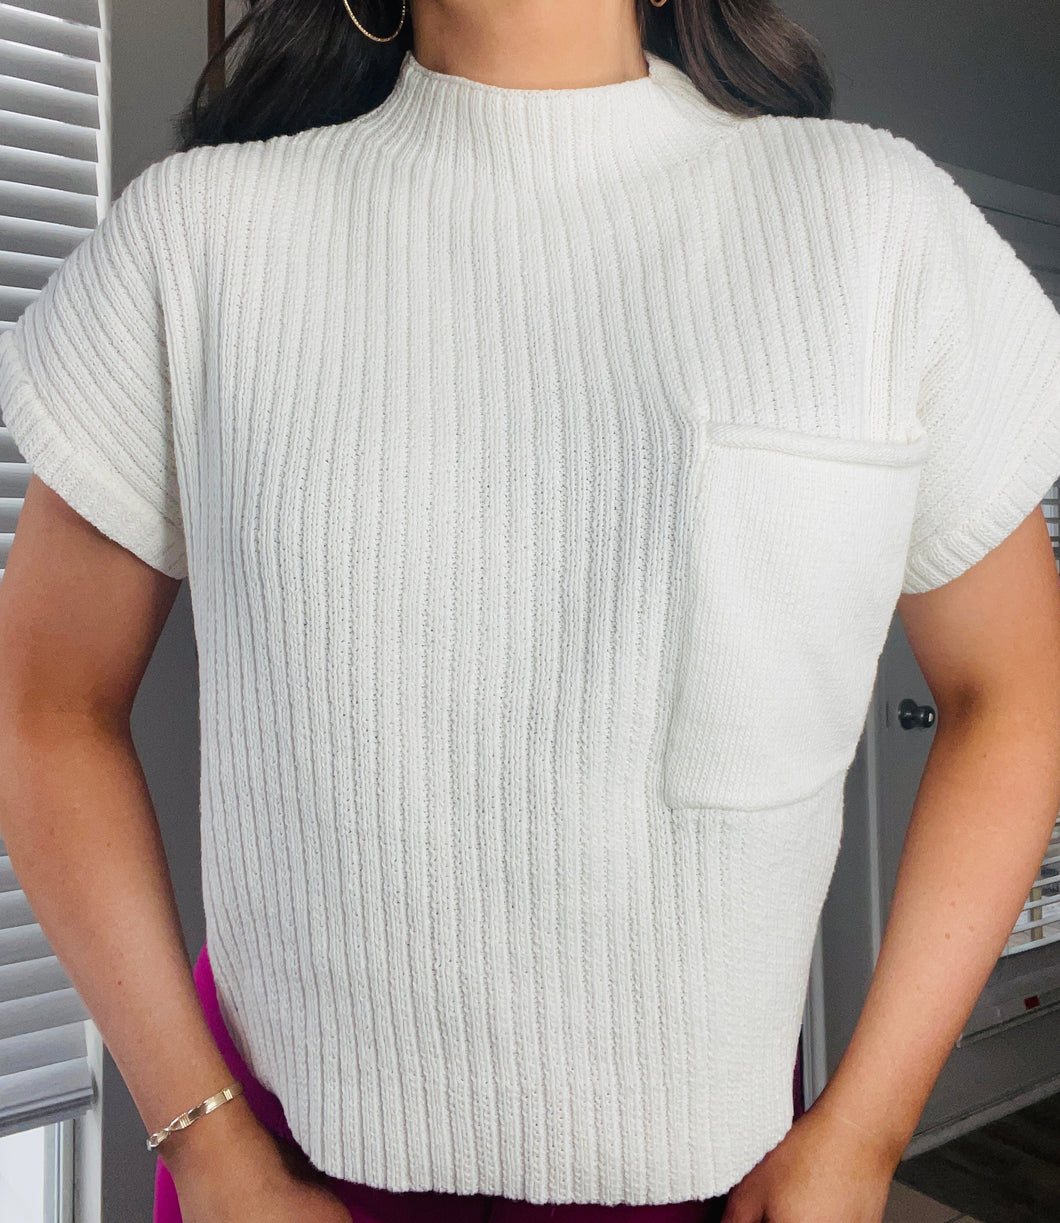 Off White Cropped Pocket Sweater